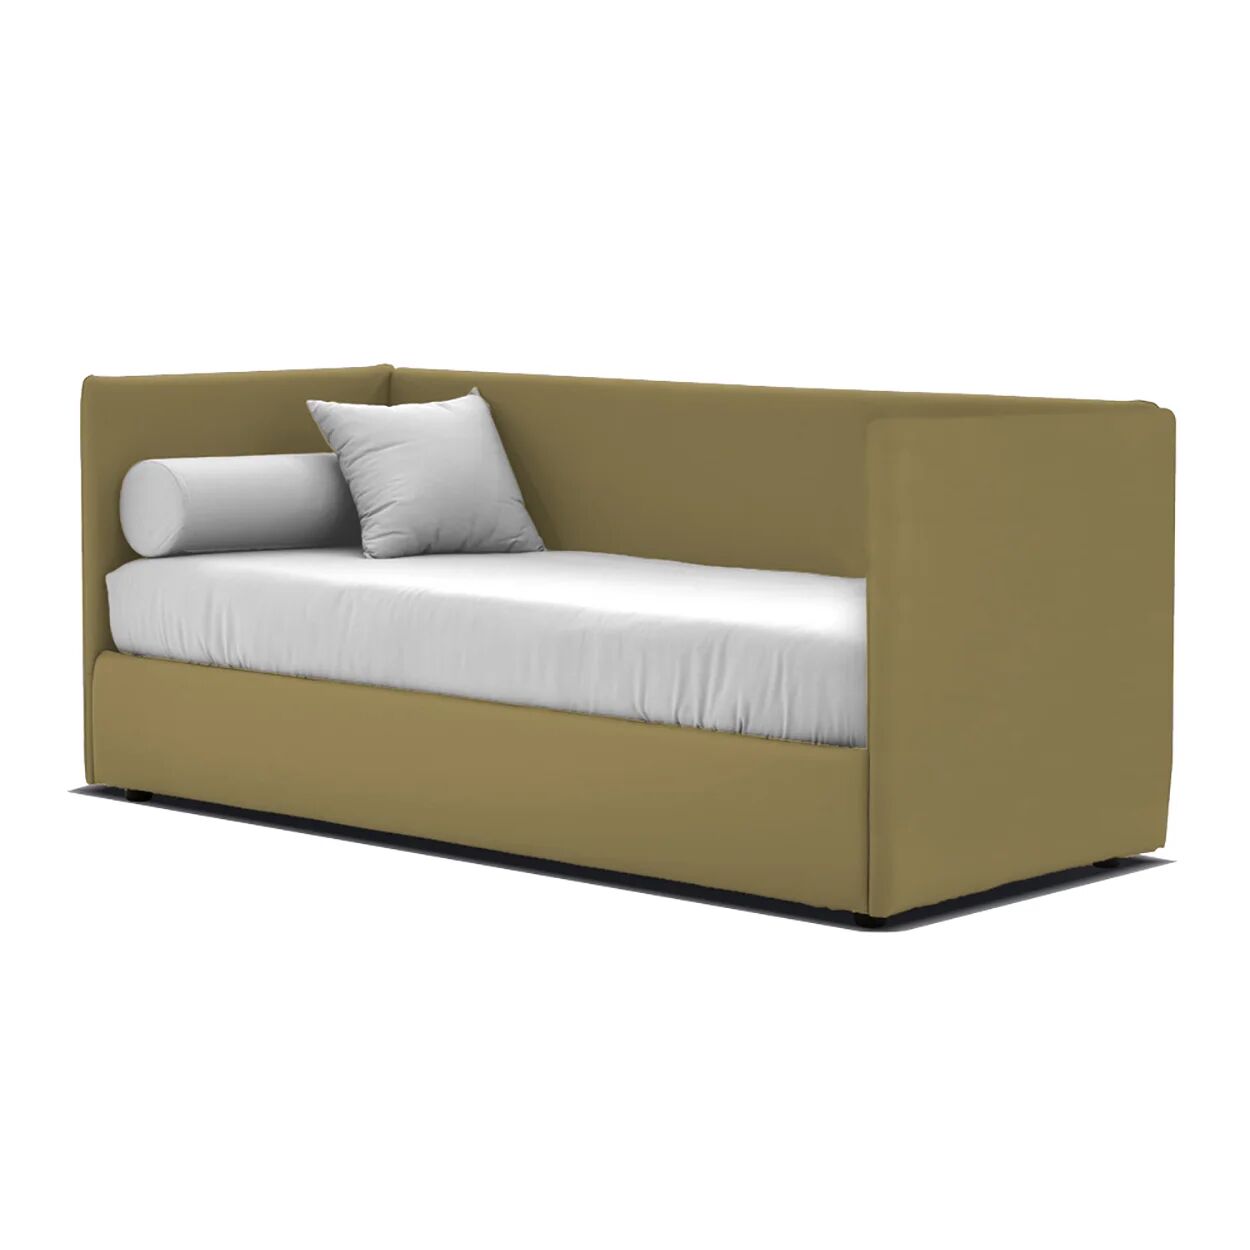 Let it Bed WHY-D-LINEAR - Letto versione storage, beige